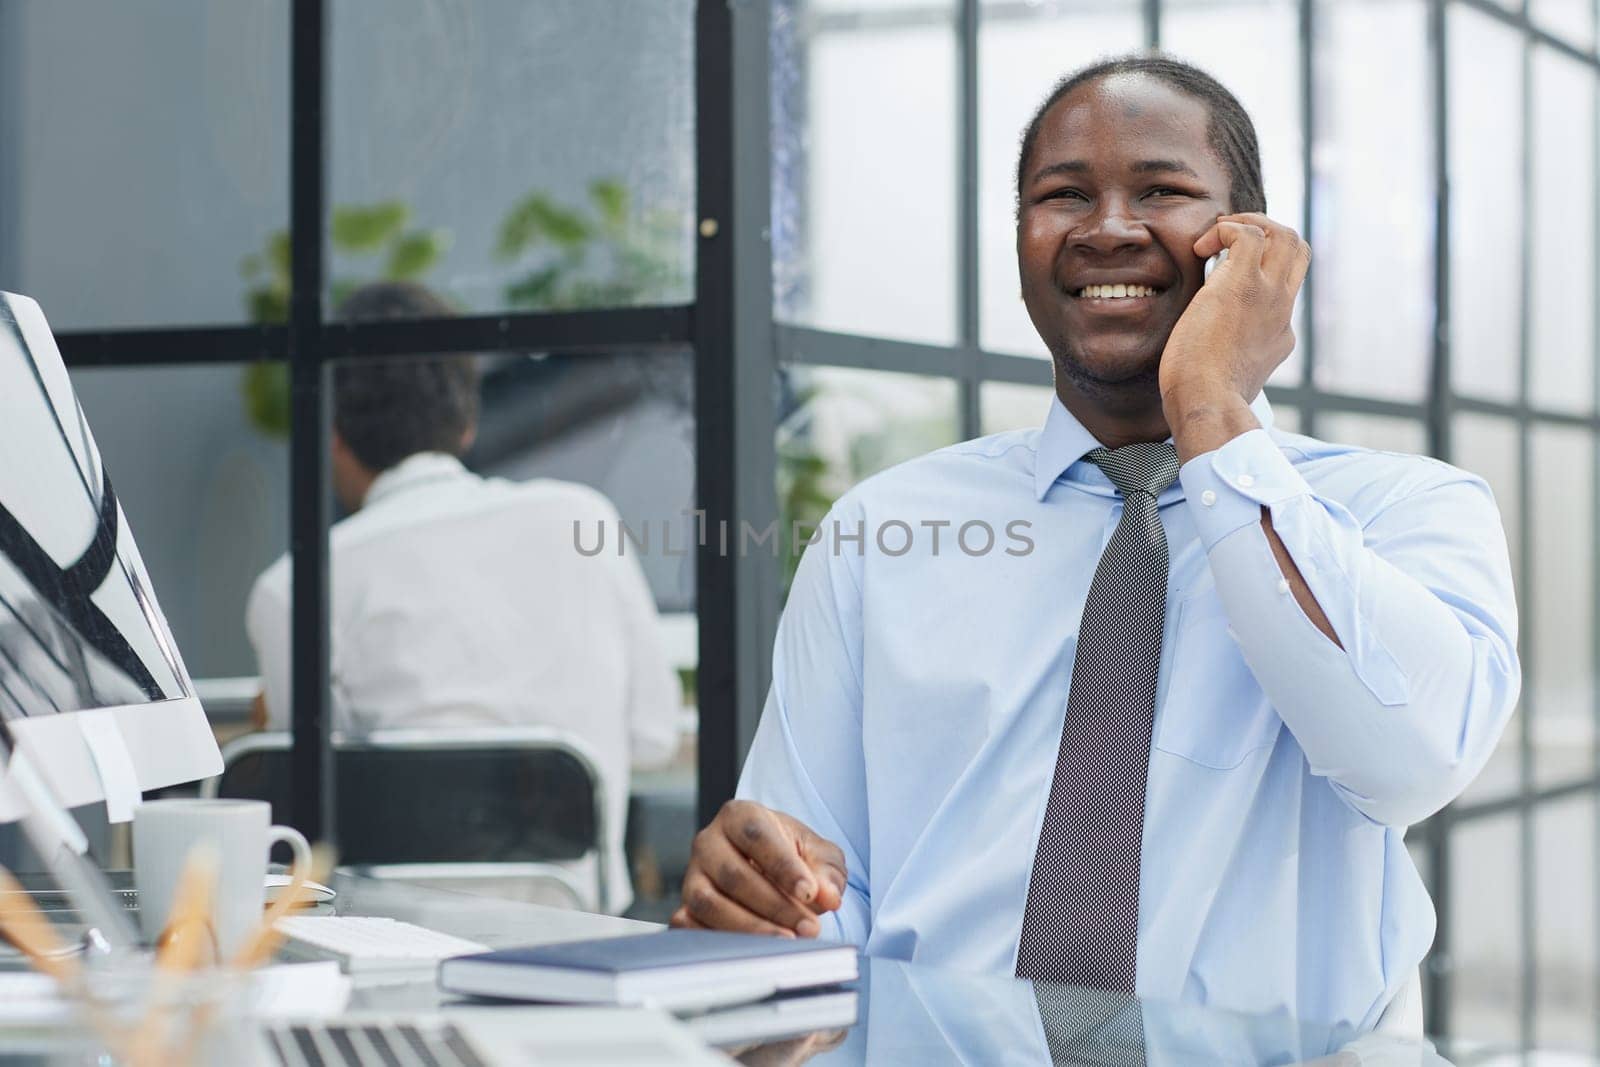 a man at a workplace at a table in front of a computer speaks on the phone by Prosto